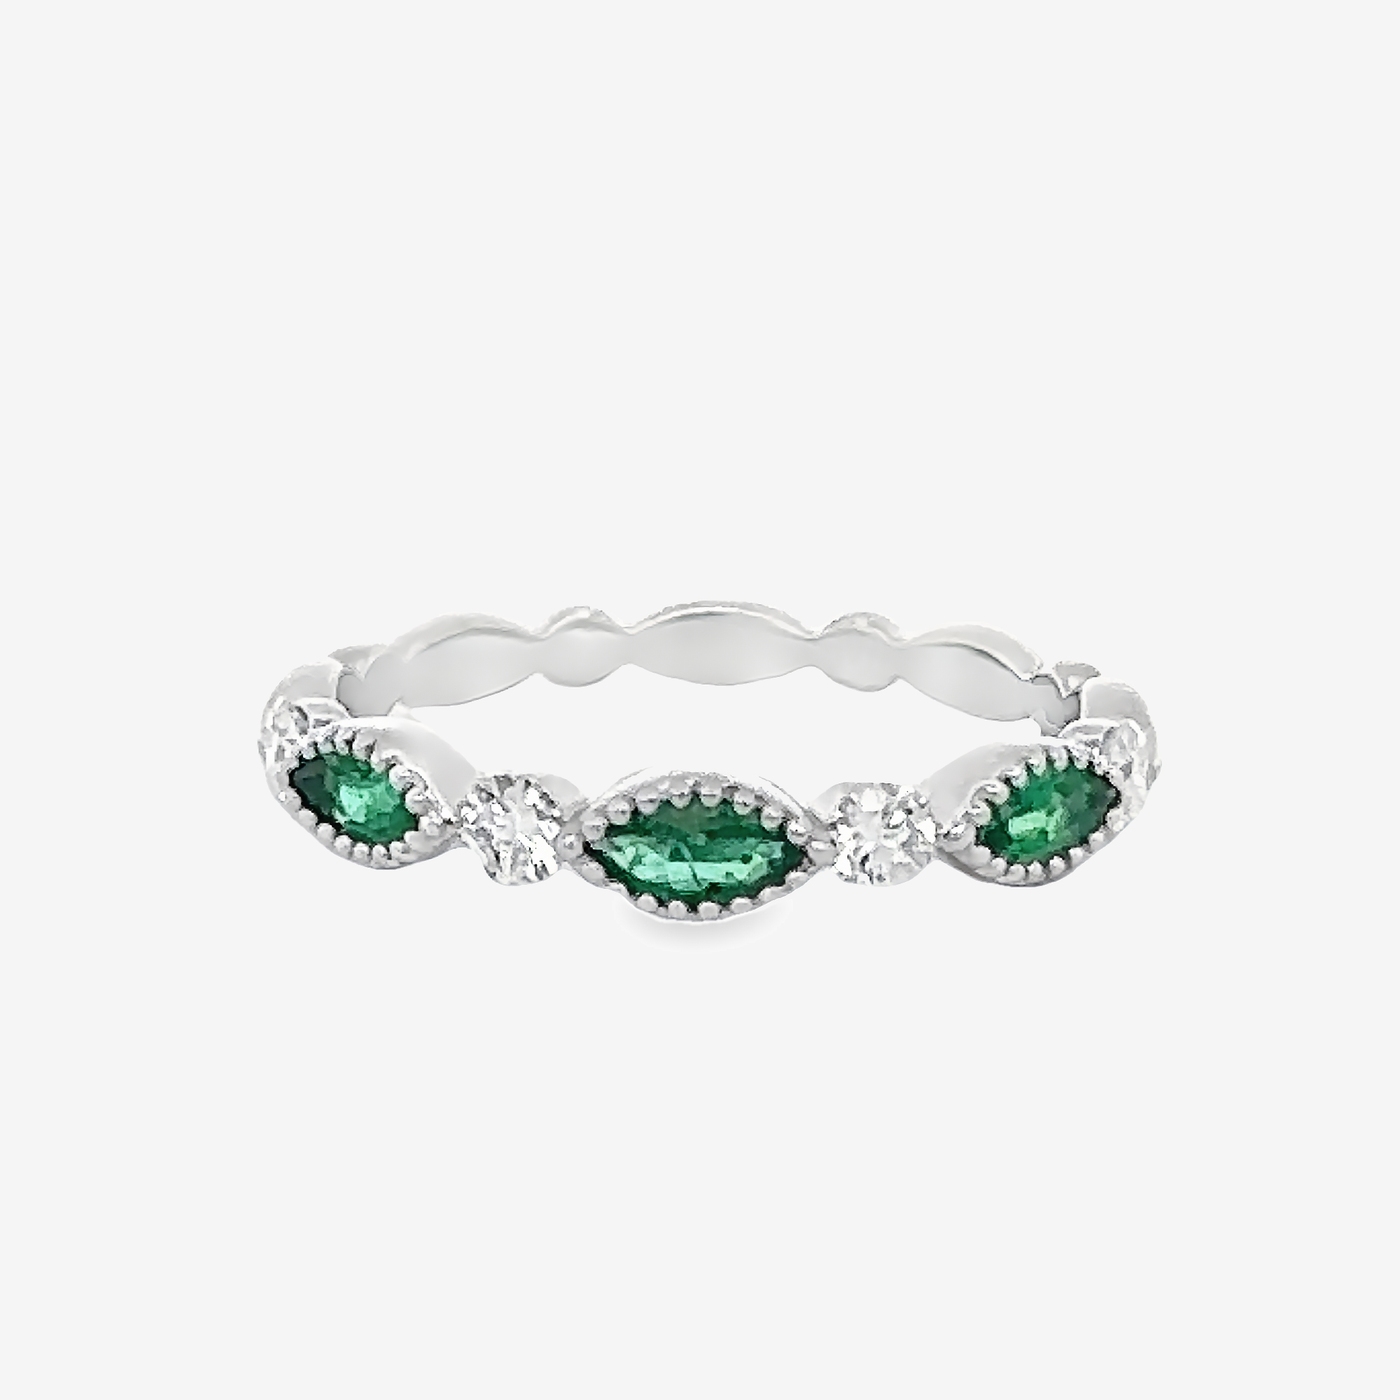 emerald and diamond ring with milgrain details